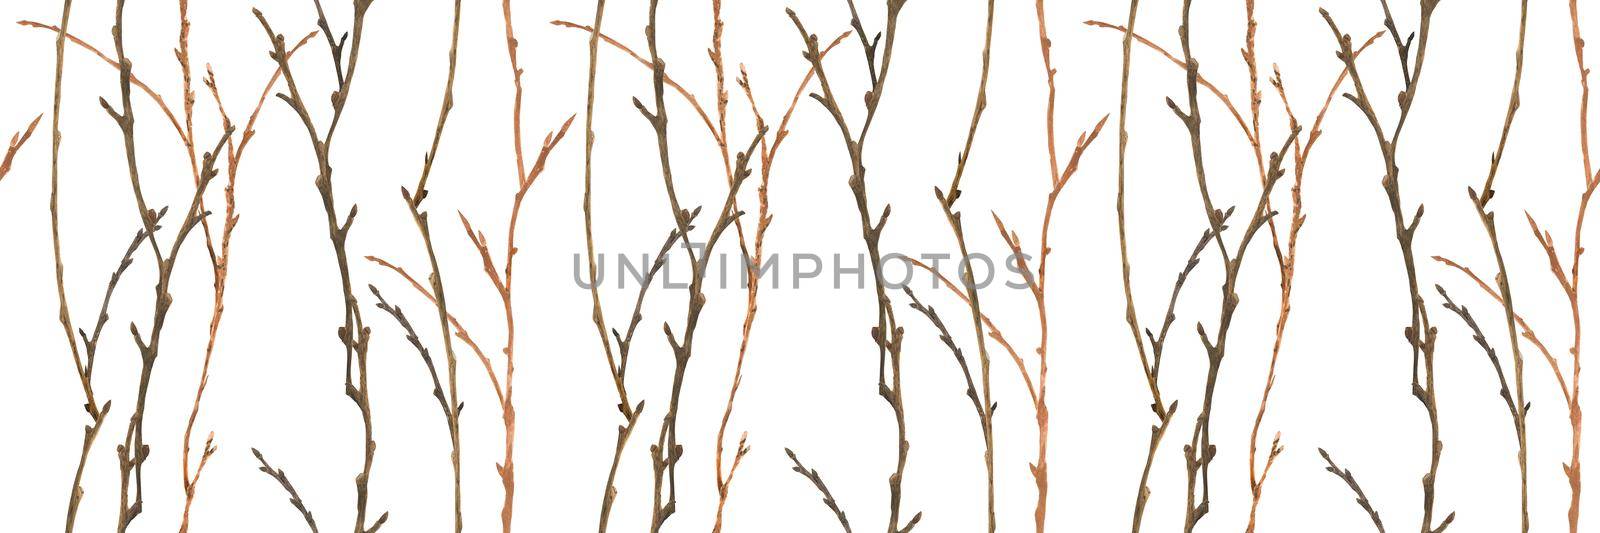 Winter forest watercolor seamless pattern with branches by Xeniasnowstorm